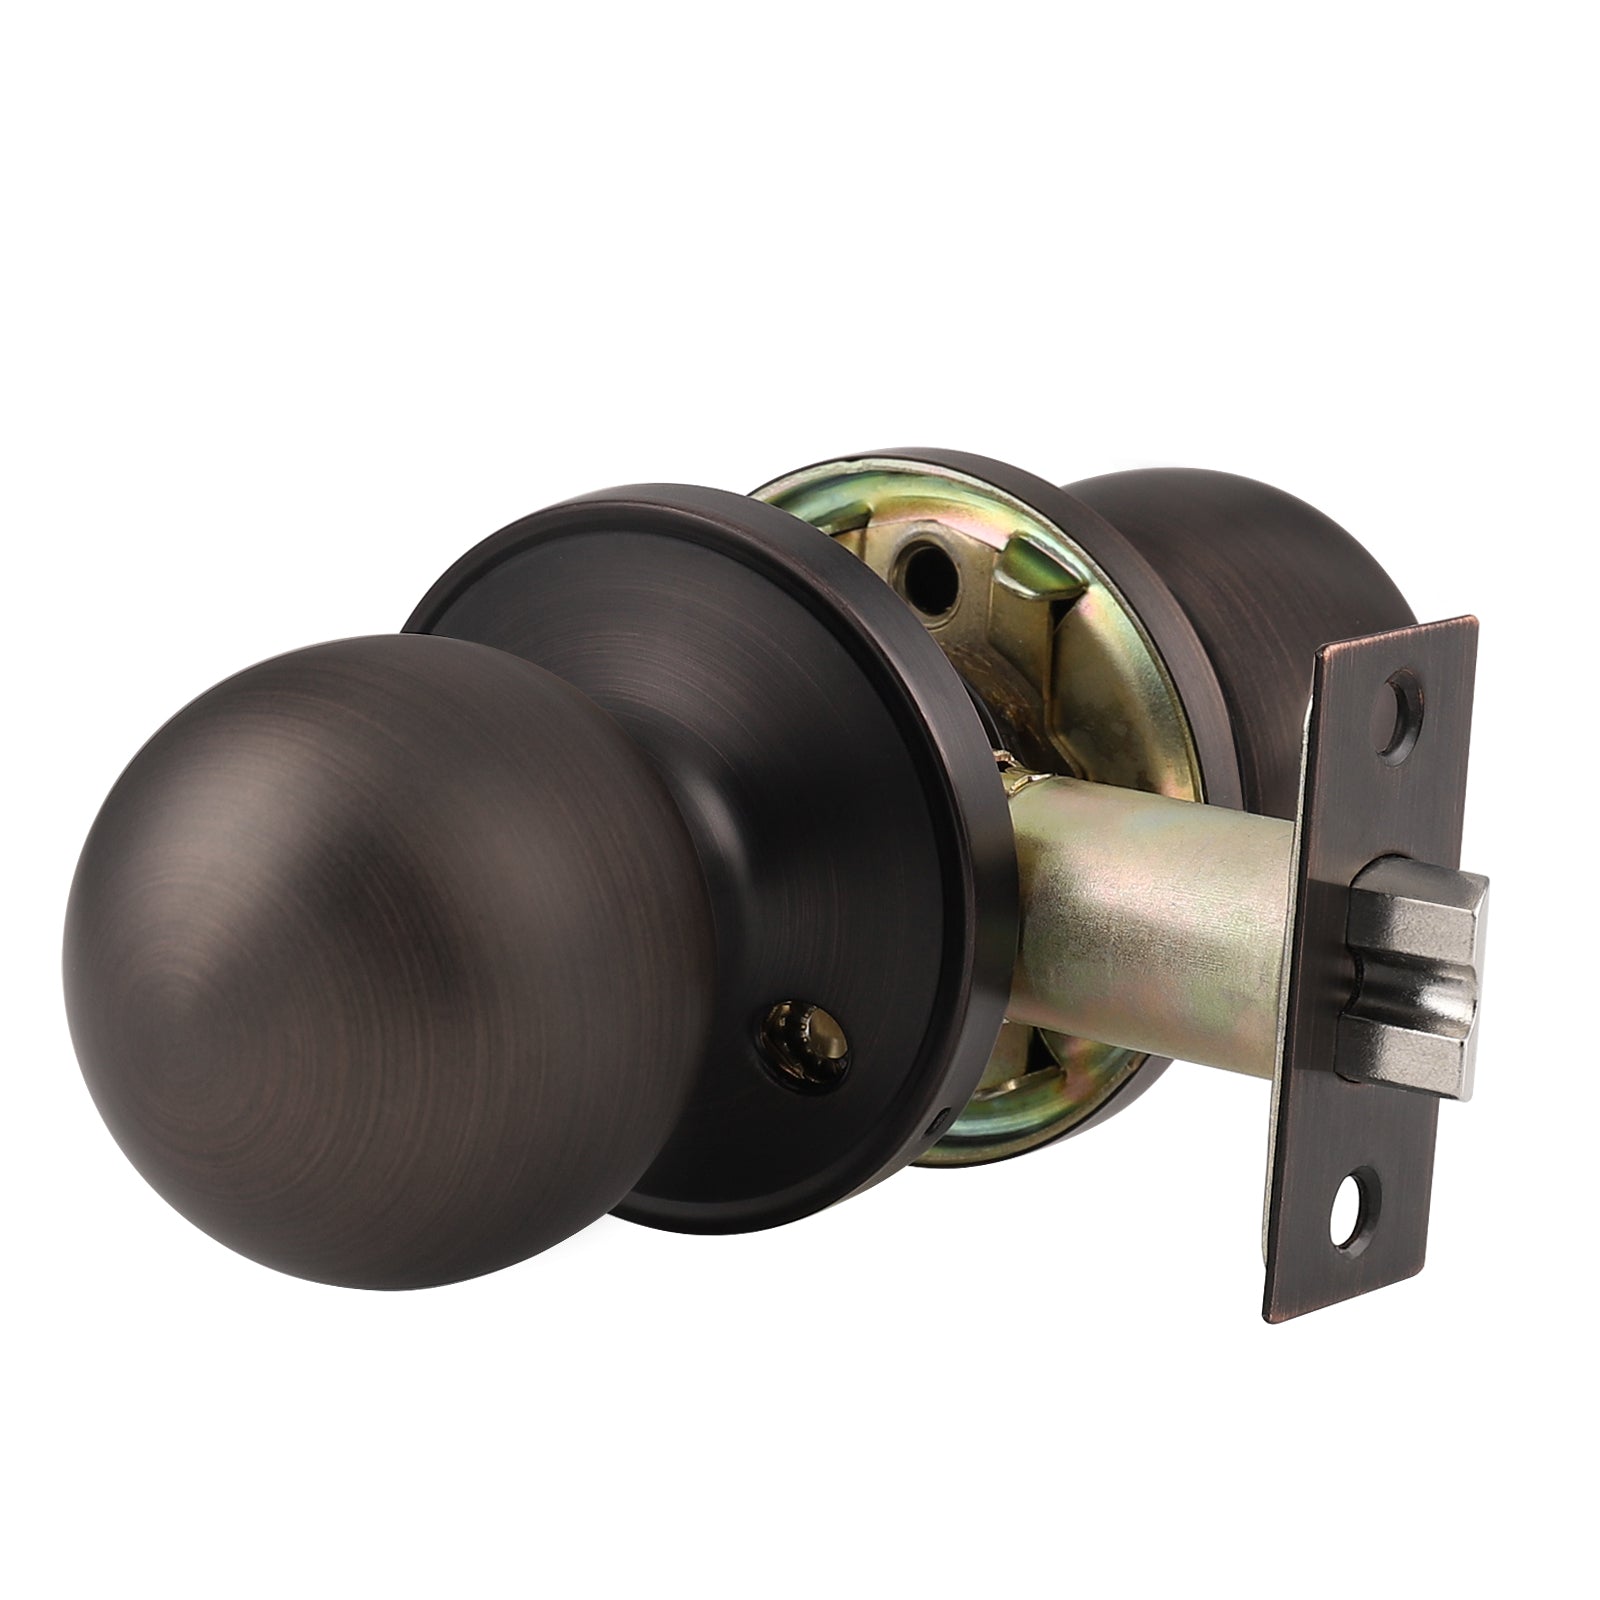 Passage Door Knobs Oil Rubbed Bronze Finish, Rould Knob Style DL607ORBPS